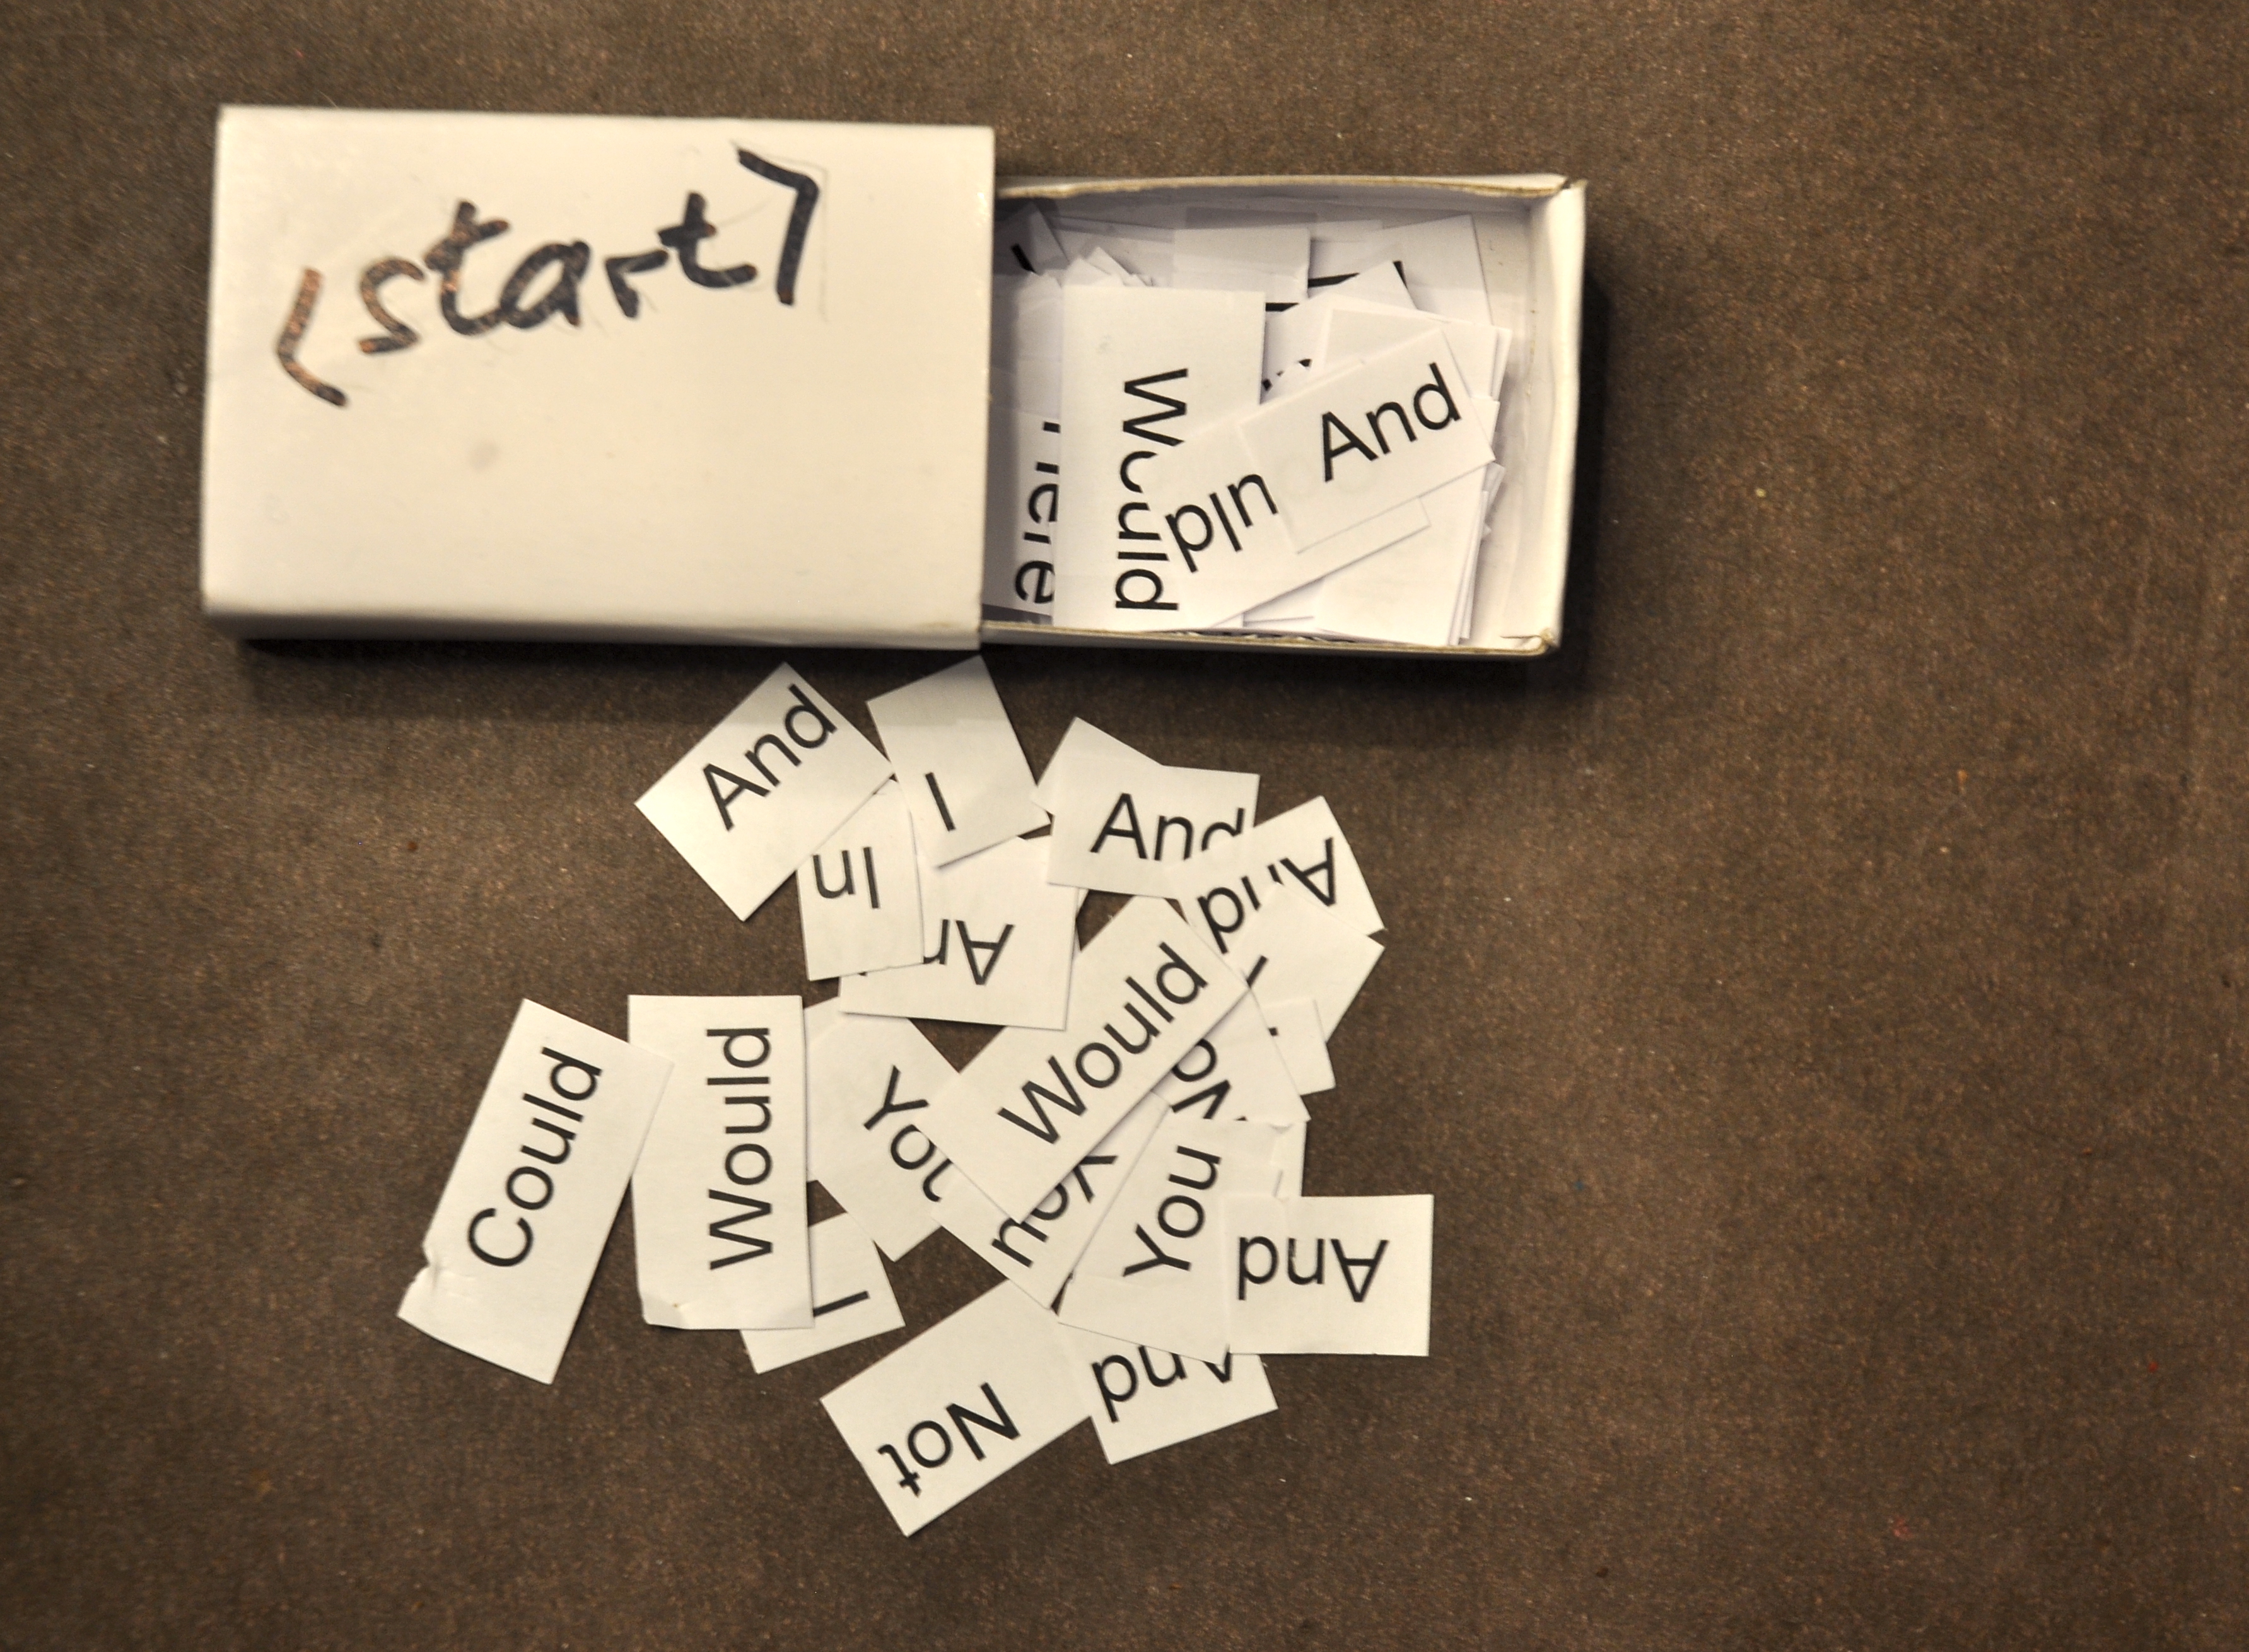 a matchbox with the word 'start' written on top, open to show many words on slips of paper